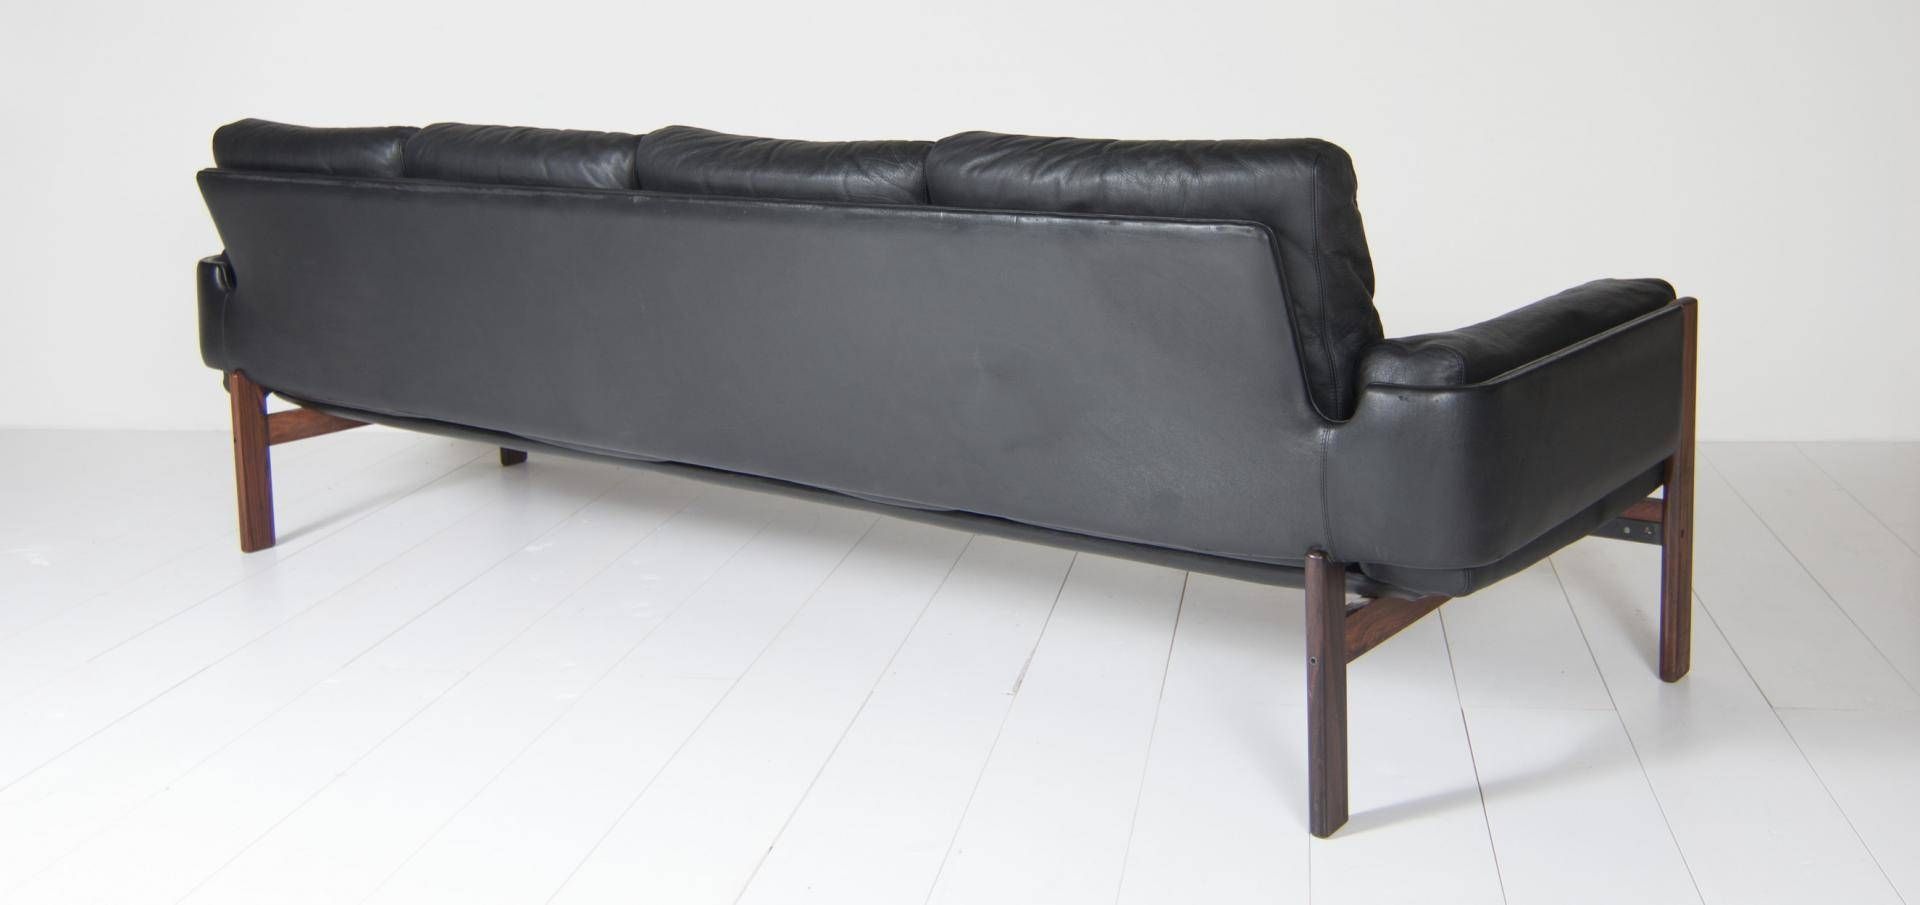 Four Seater Black Leather Sofasven Ivar Dysthe For Dokka For Inside 4 Seater Couch (View 10 of 30)